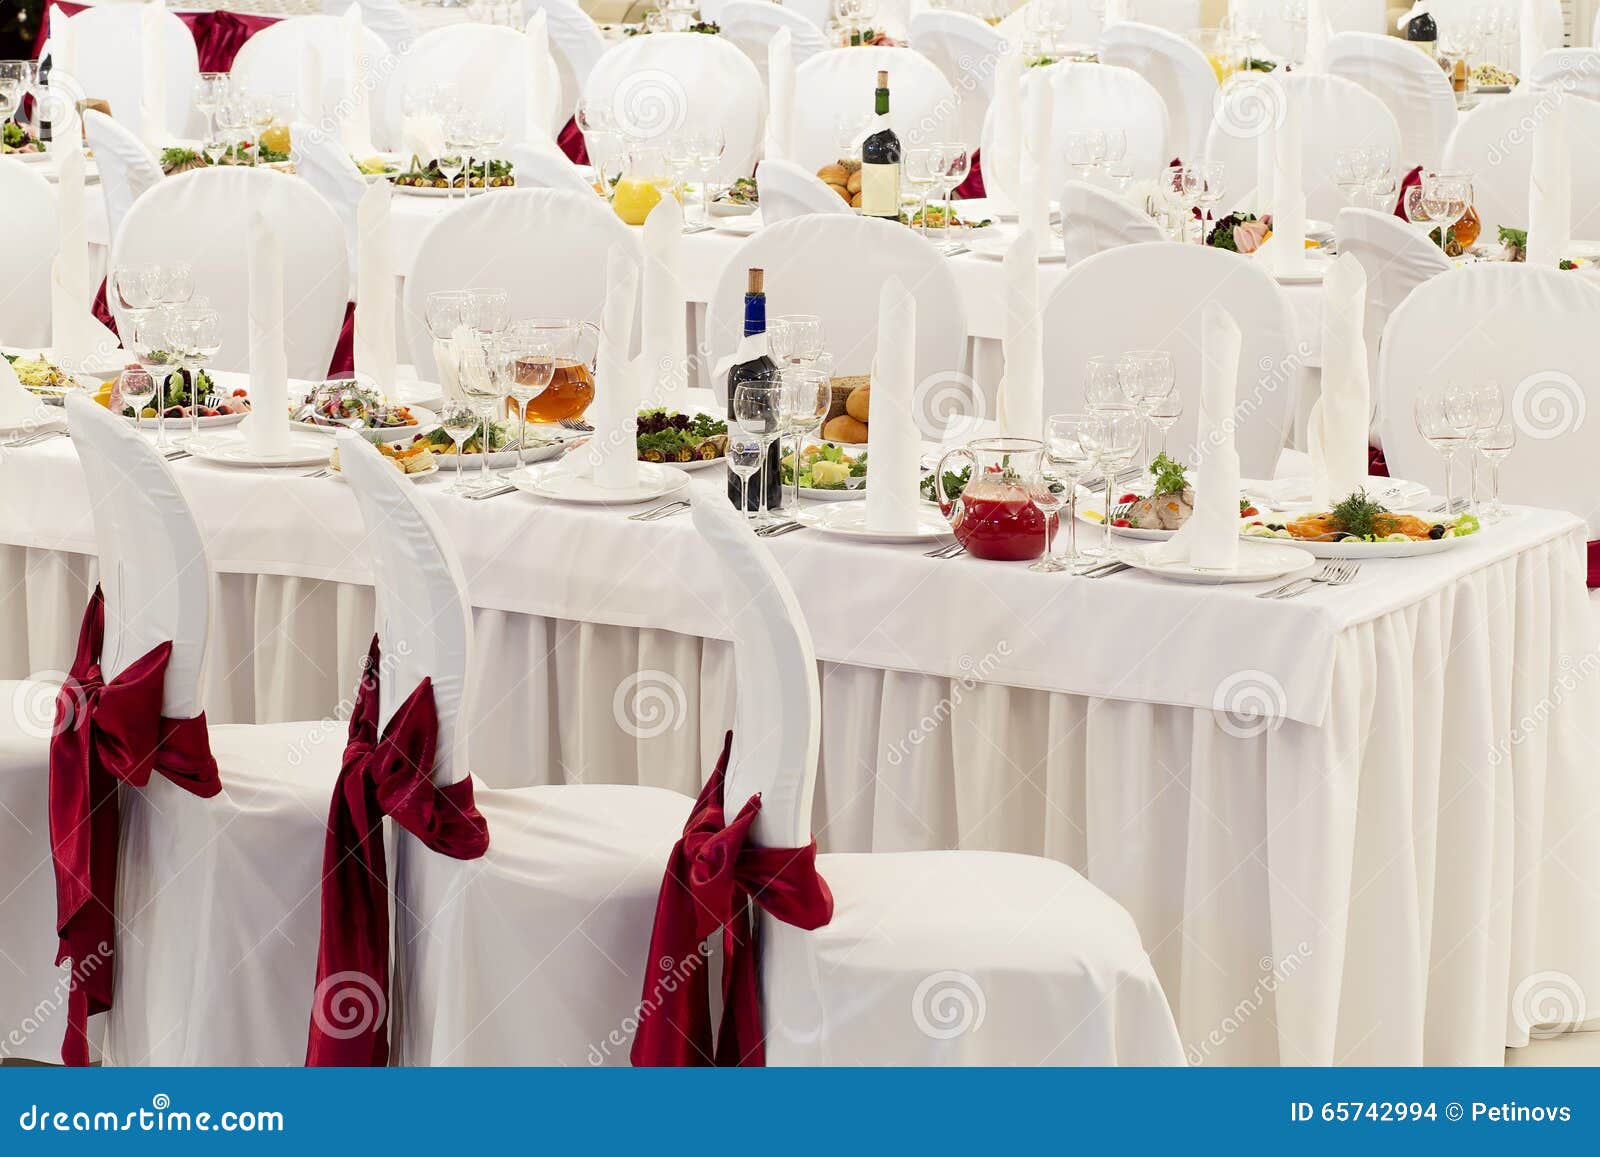 A Restaurant Banquet Room Decorated For A Wedding Stock 